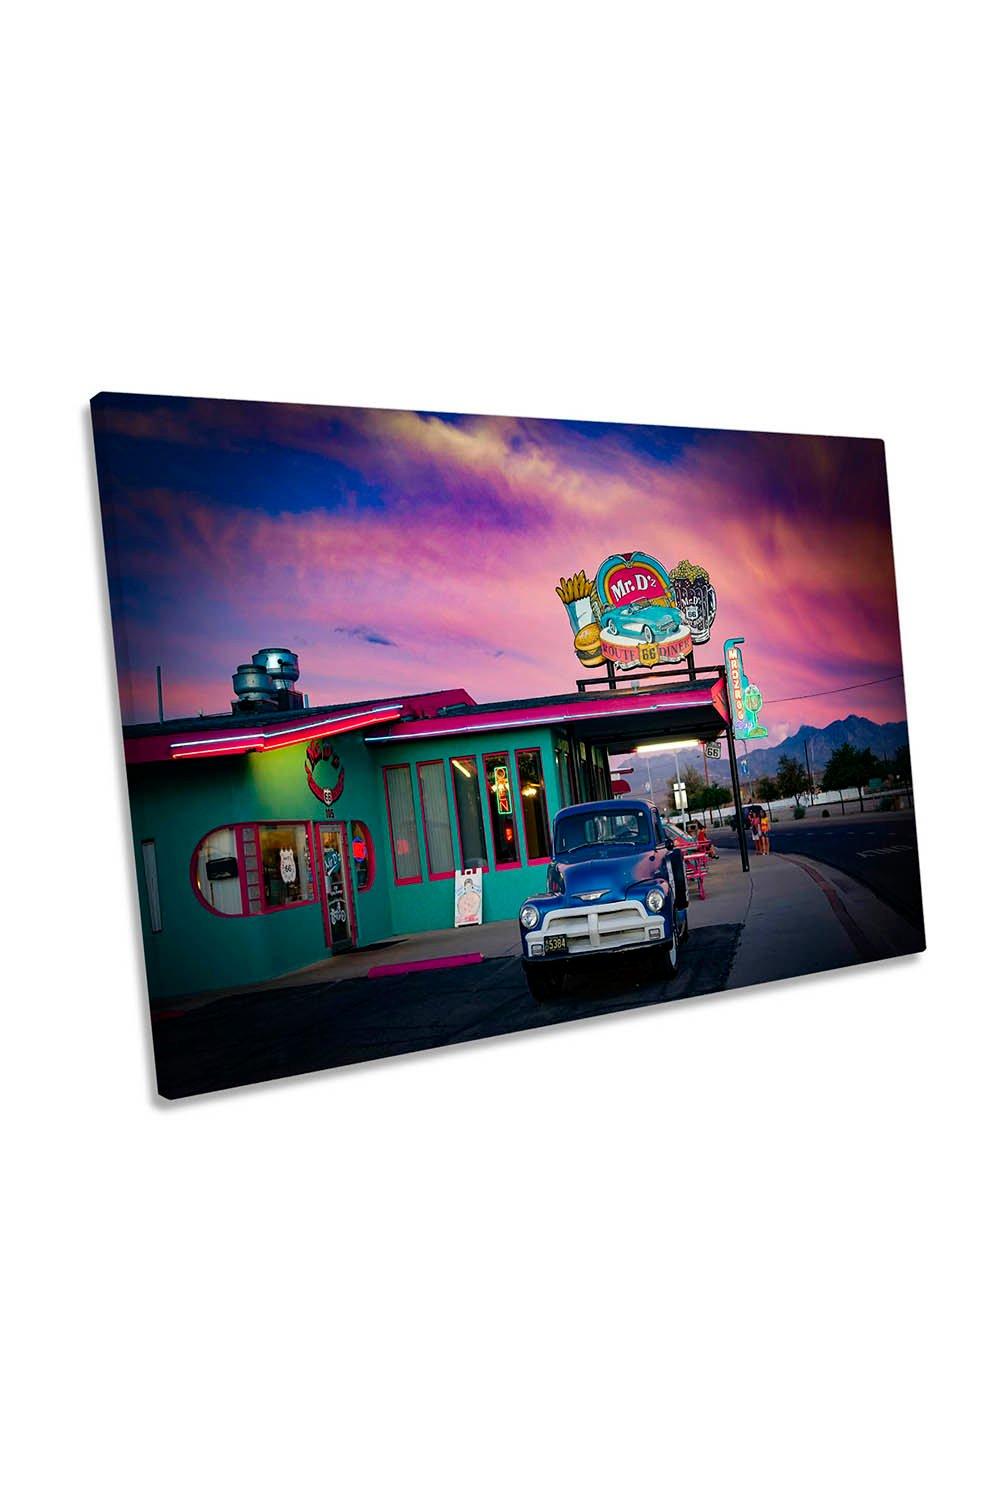 Sunset Route 66 Diner Old Classic Car Canvas Wall Art Picture Print